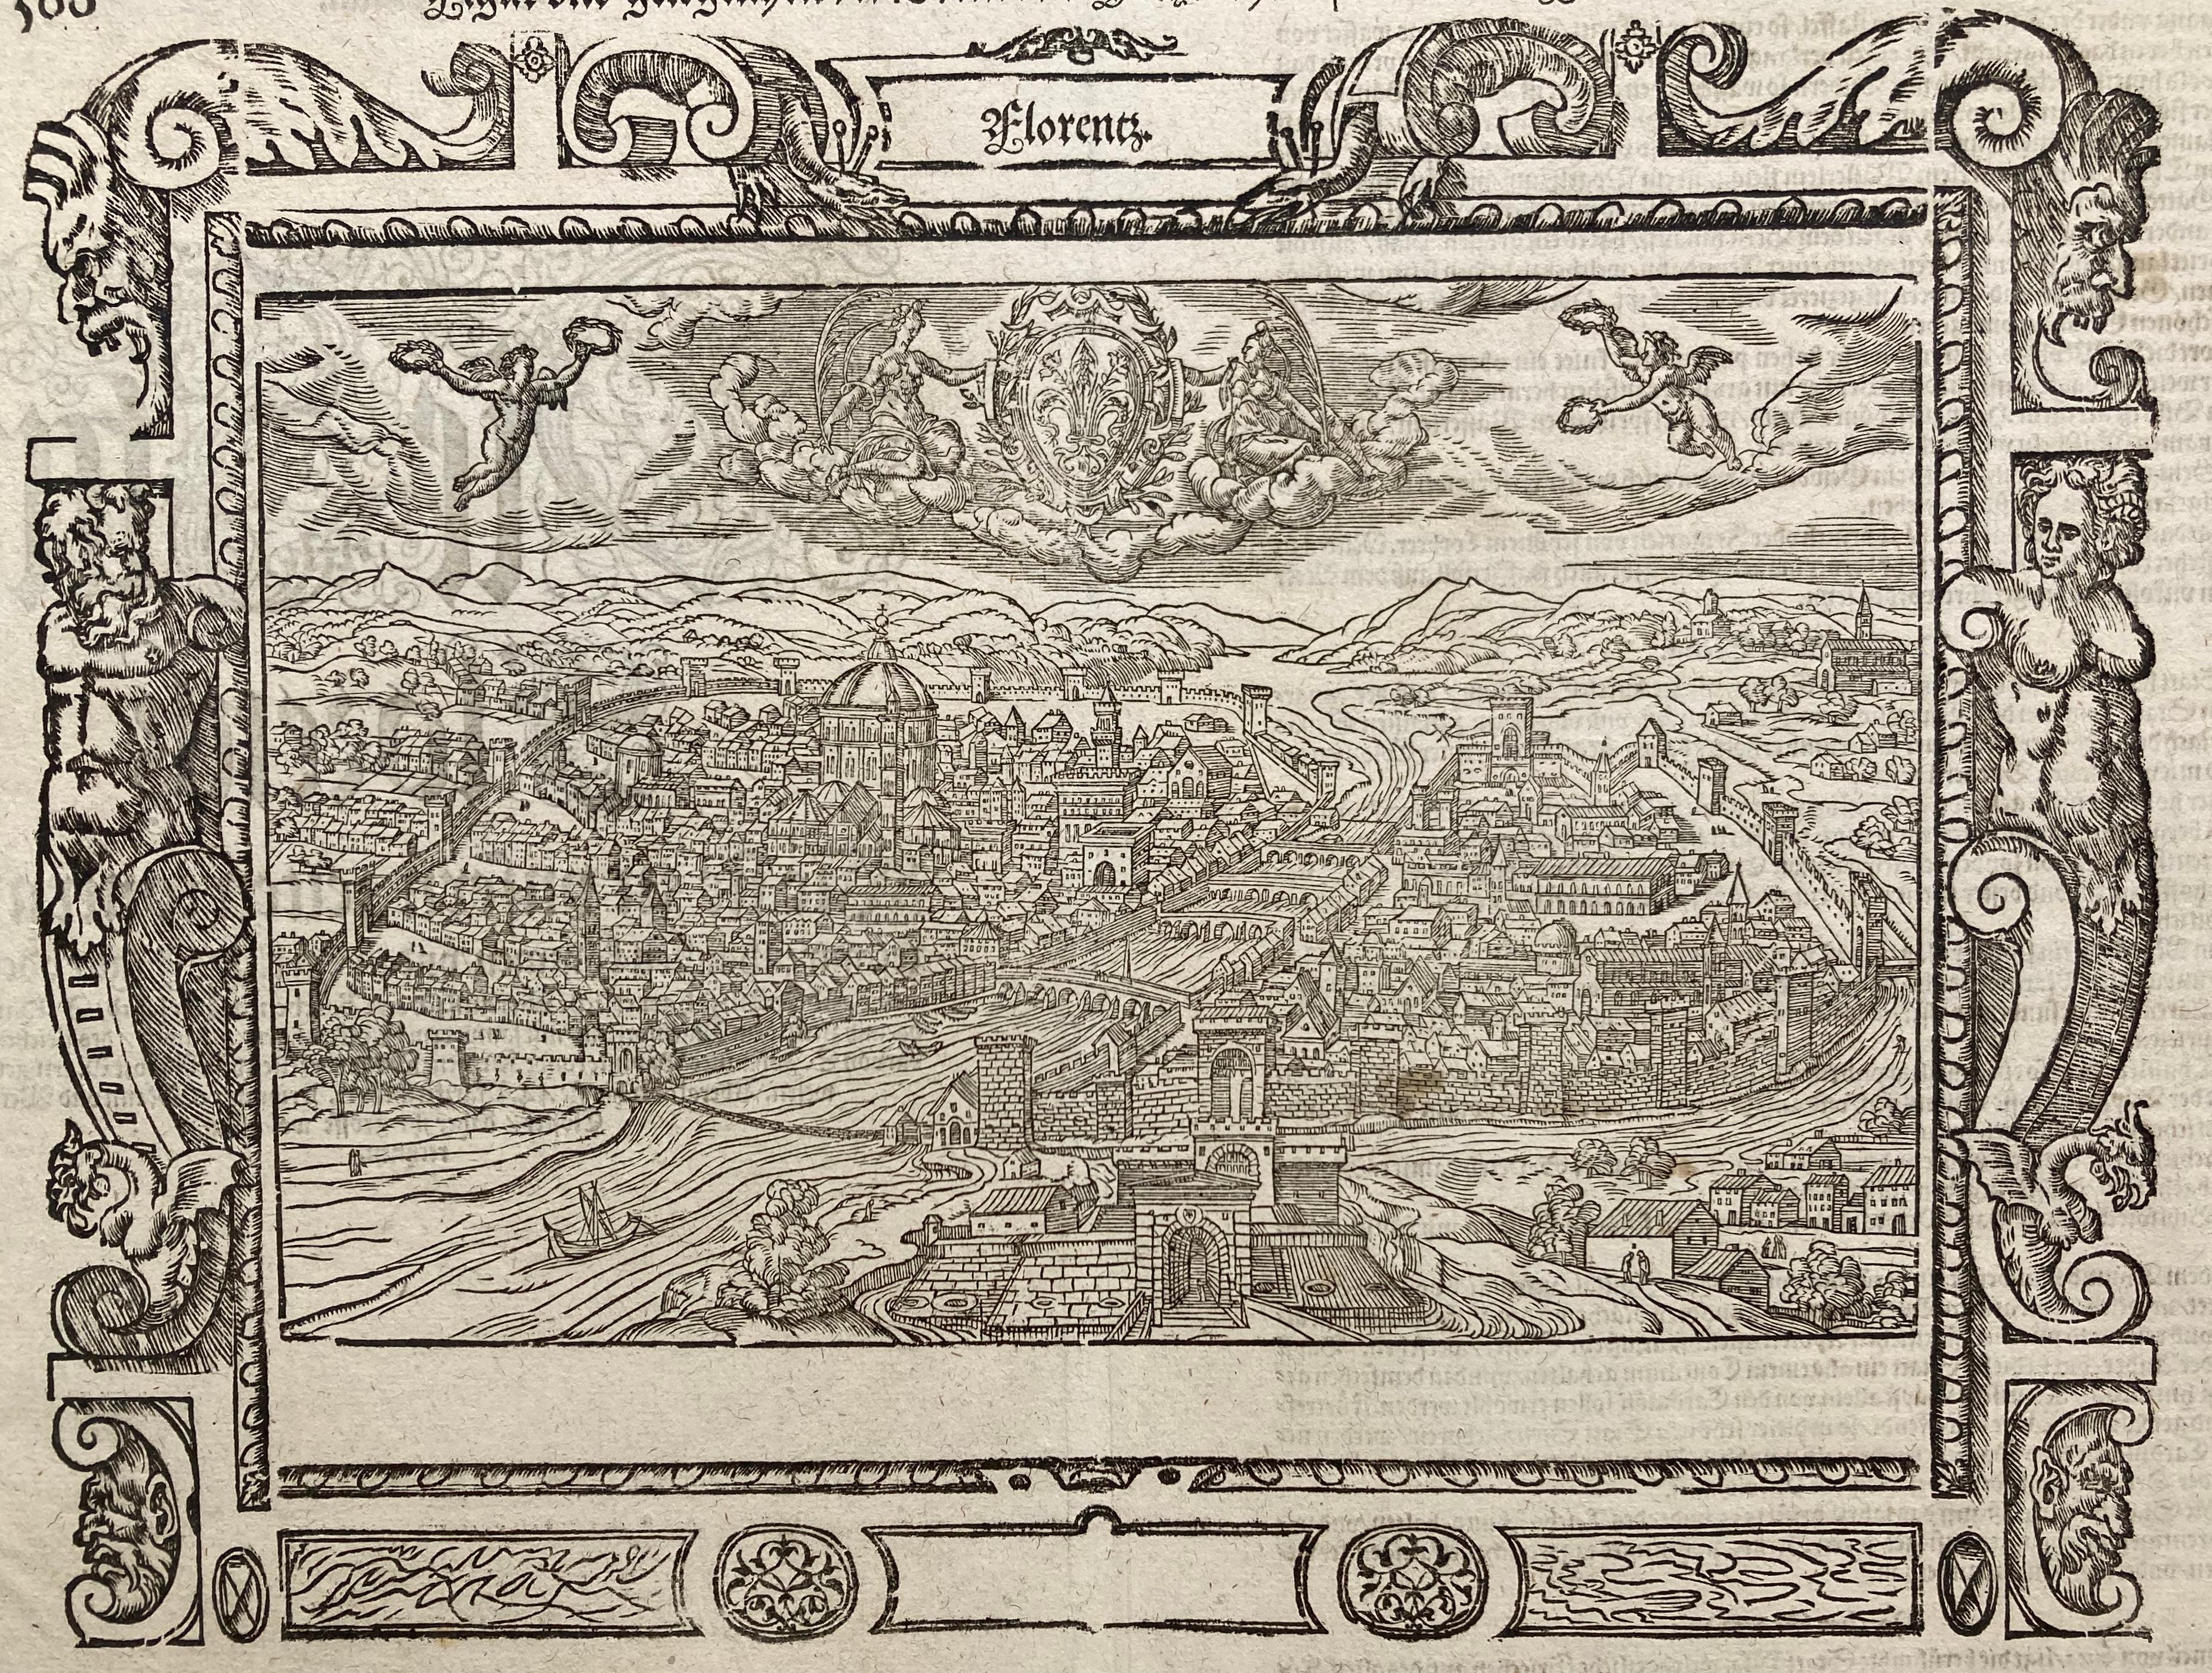 !6th c. VIEW OF FLORENCE 